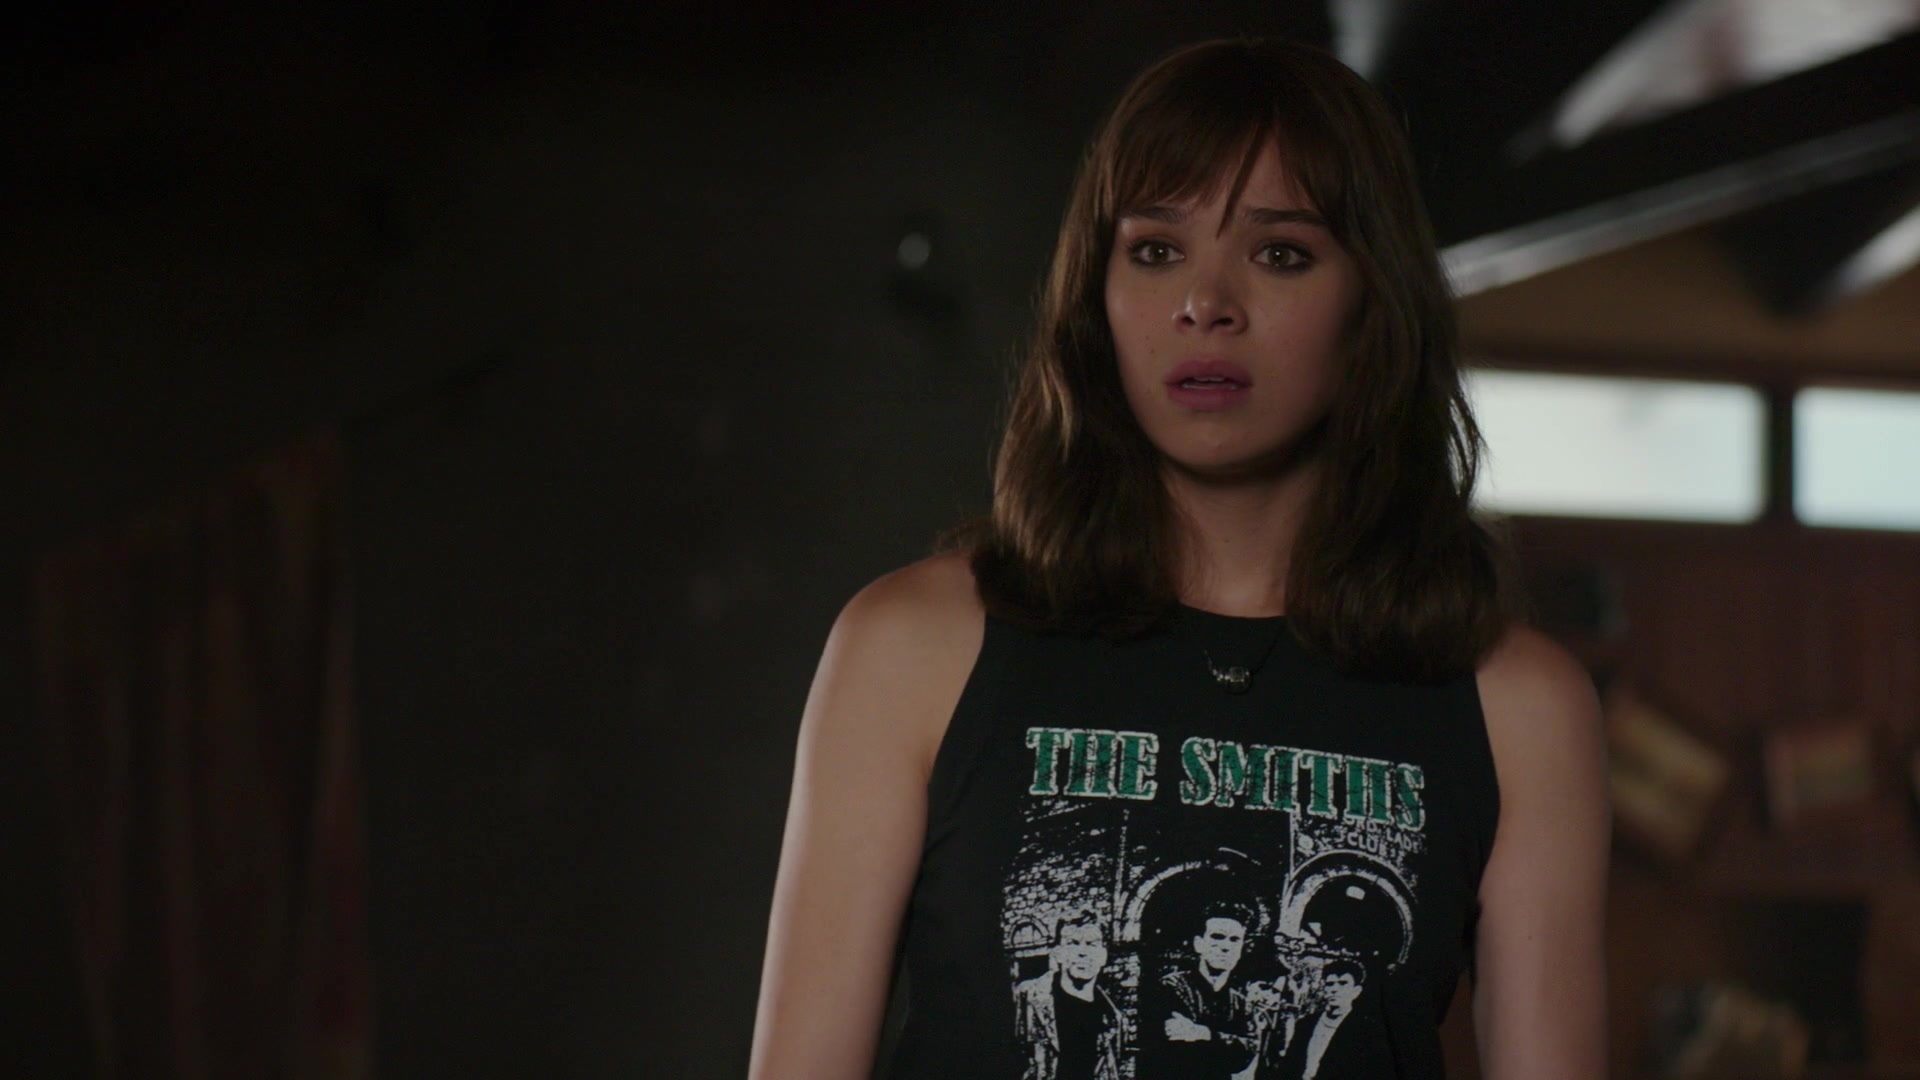 Hailee Steinfeld wardrobe in The Smiths T-shirt, Indie and hip, BumbleBee movie, Musical vibes, 1920x1080 Full HD Desktop